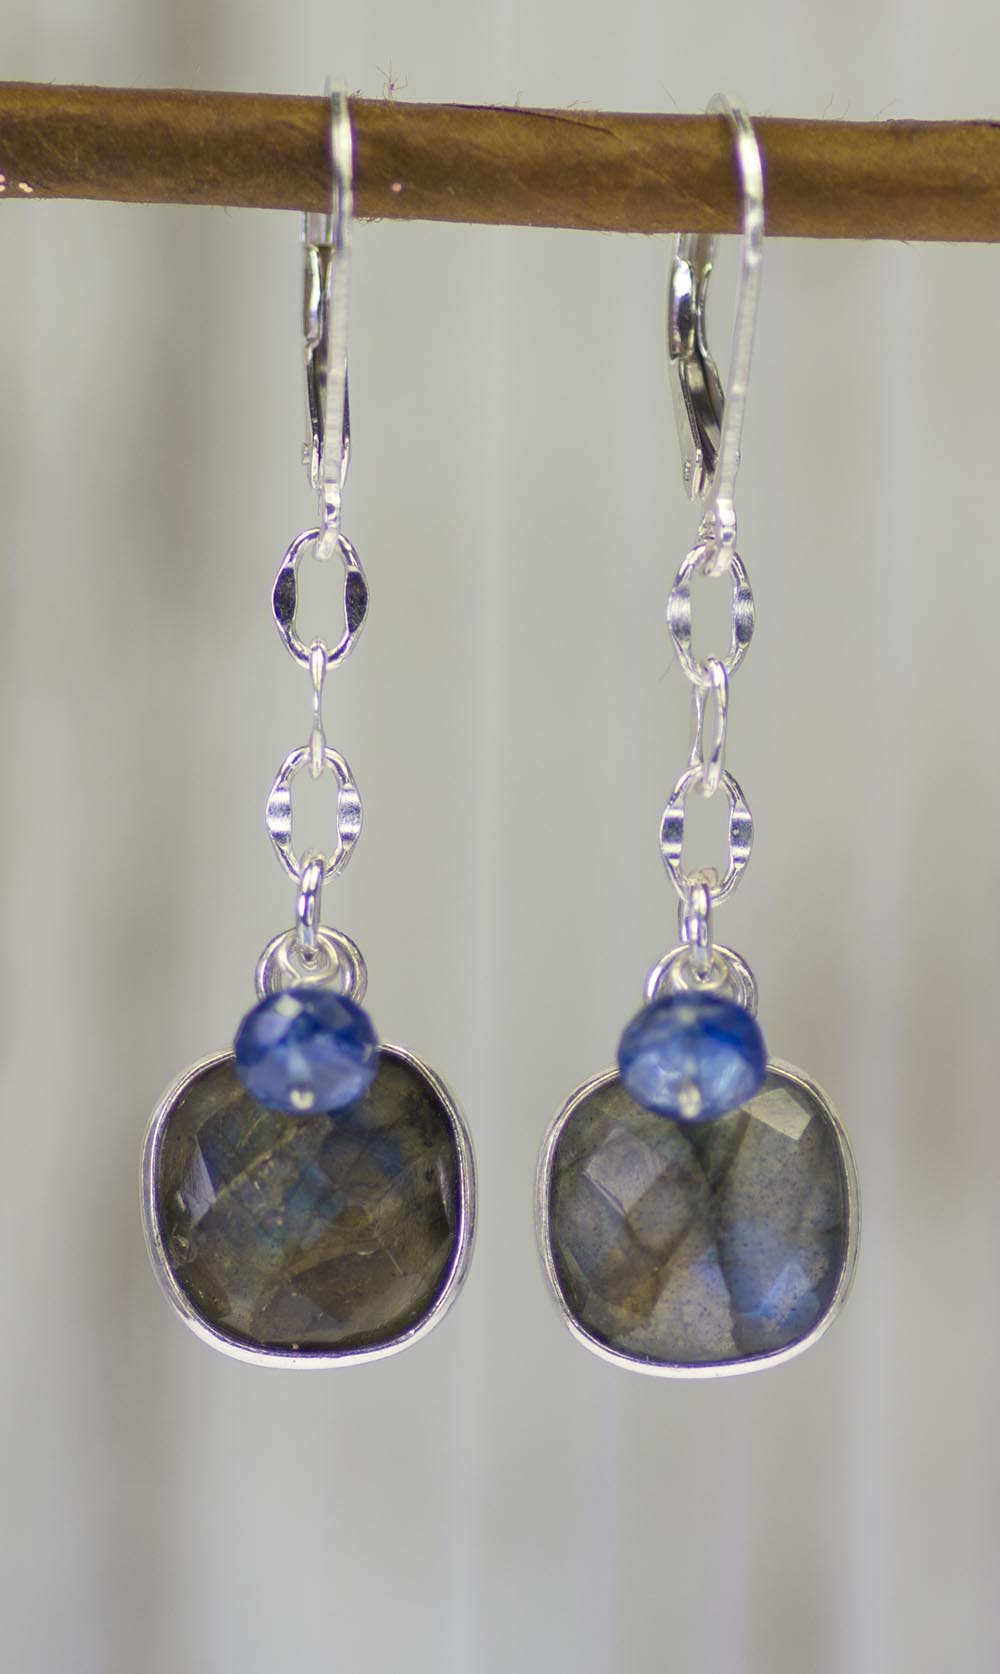 Labradorite and Kyanite Earrings by Kristin Ford